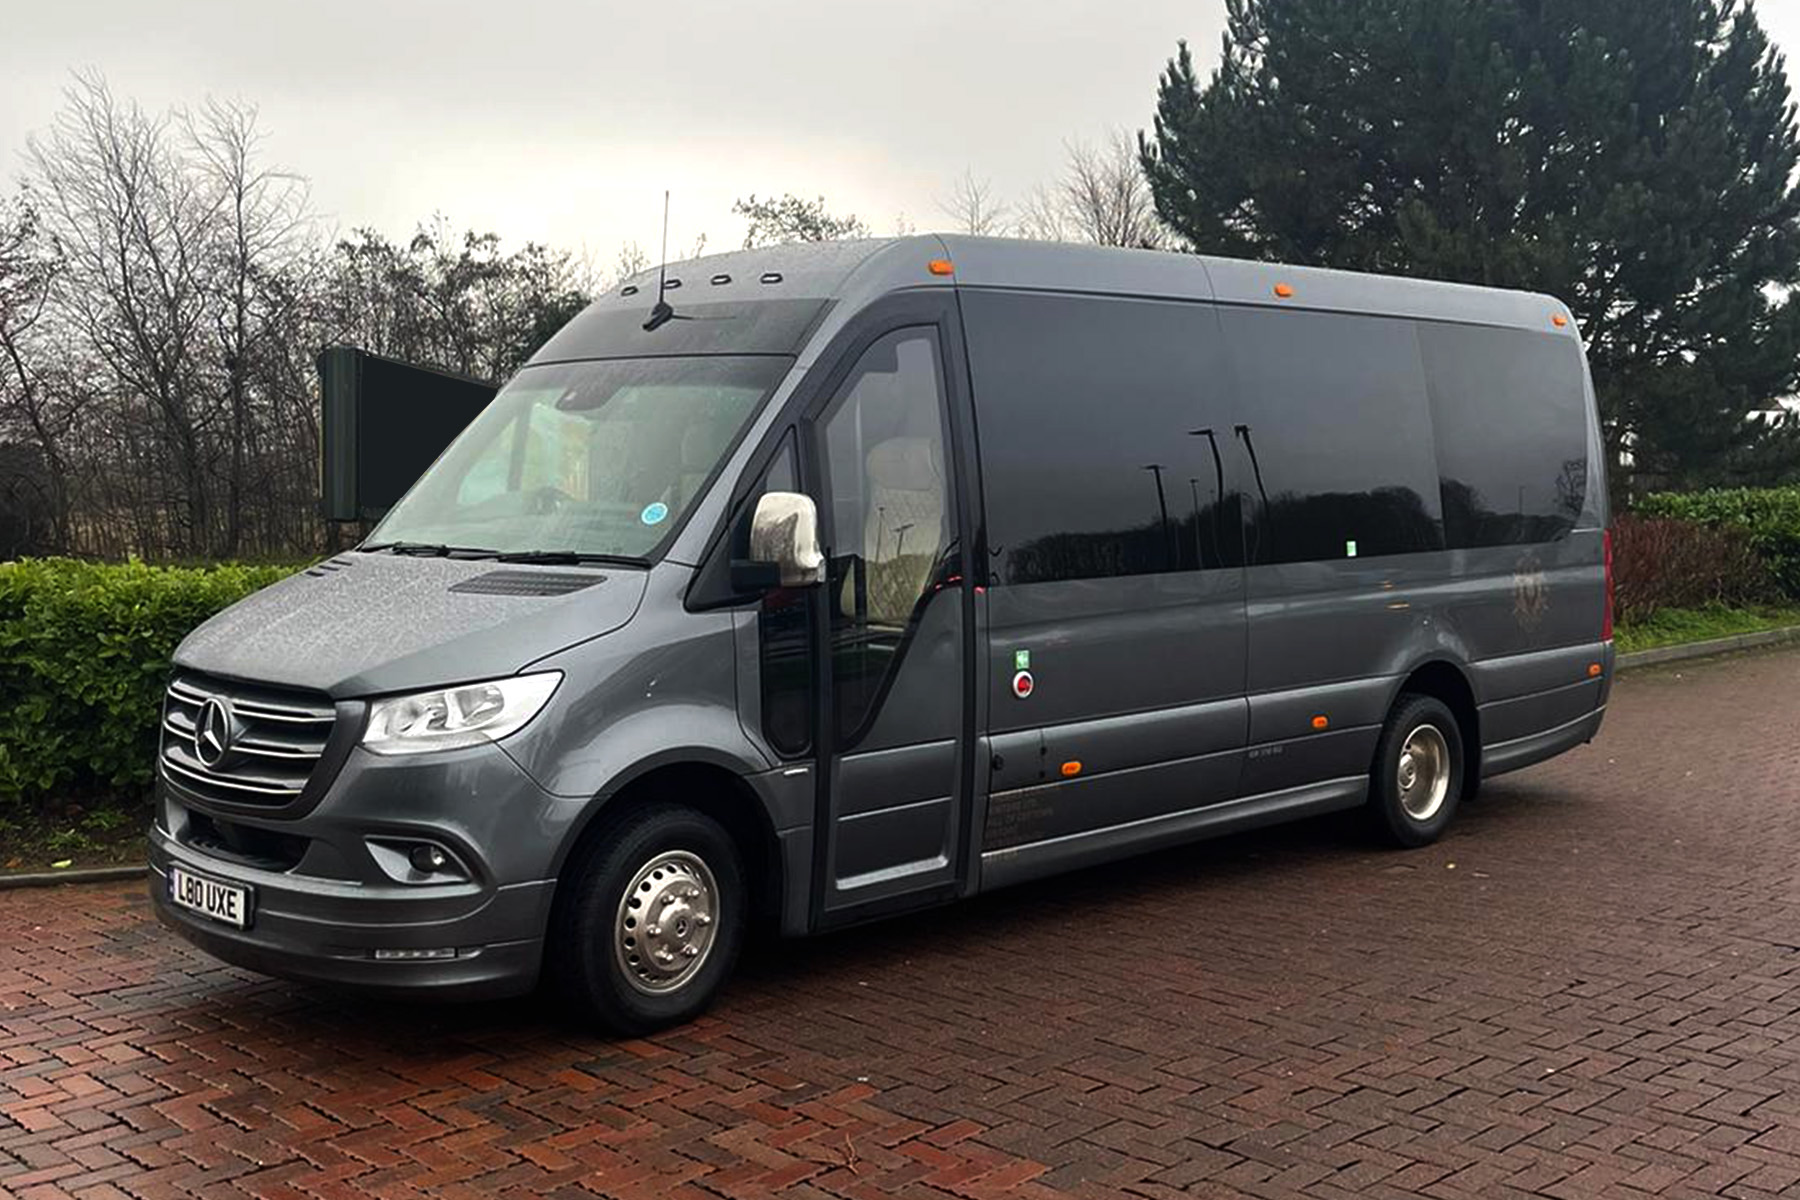 The Ultimate Guide to Hiring a Minibus for Group Travel in the UK